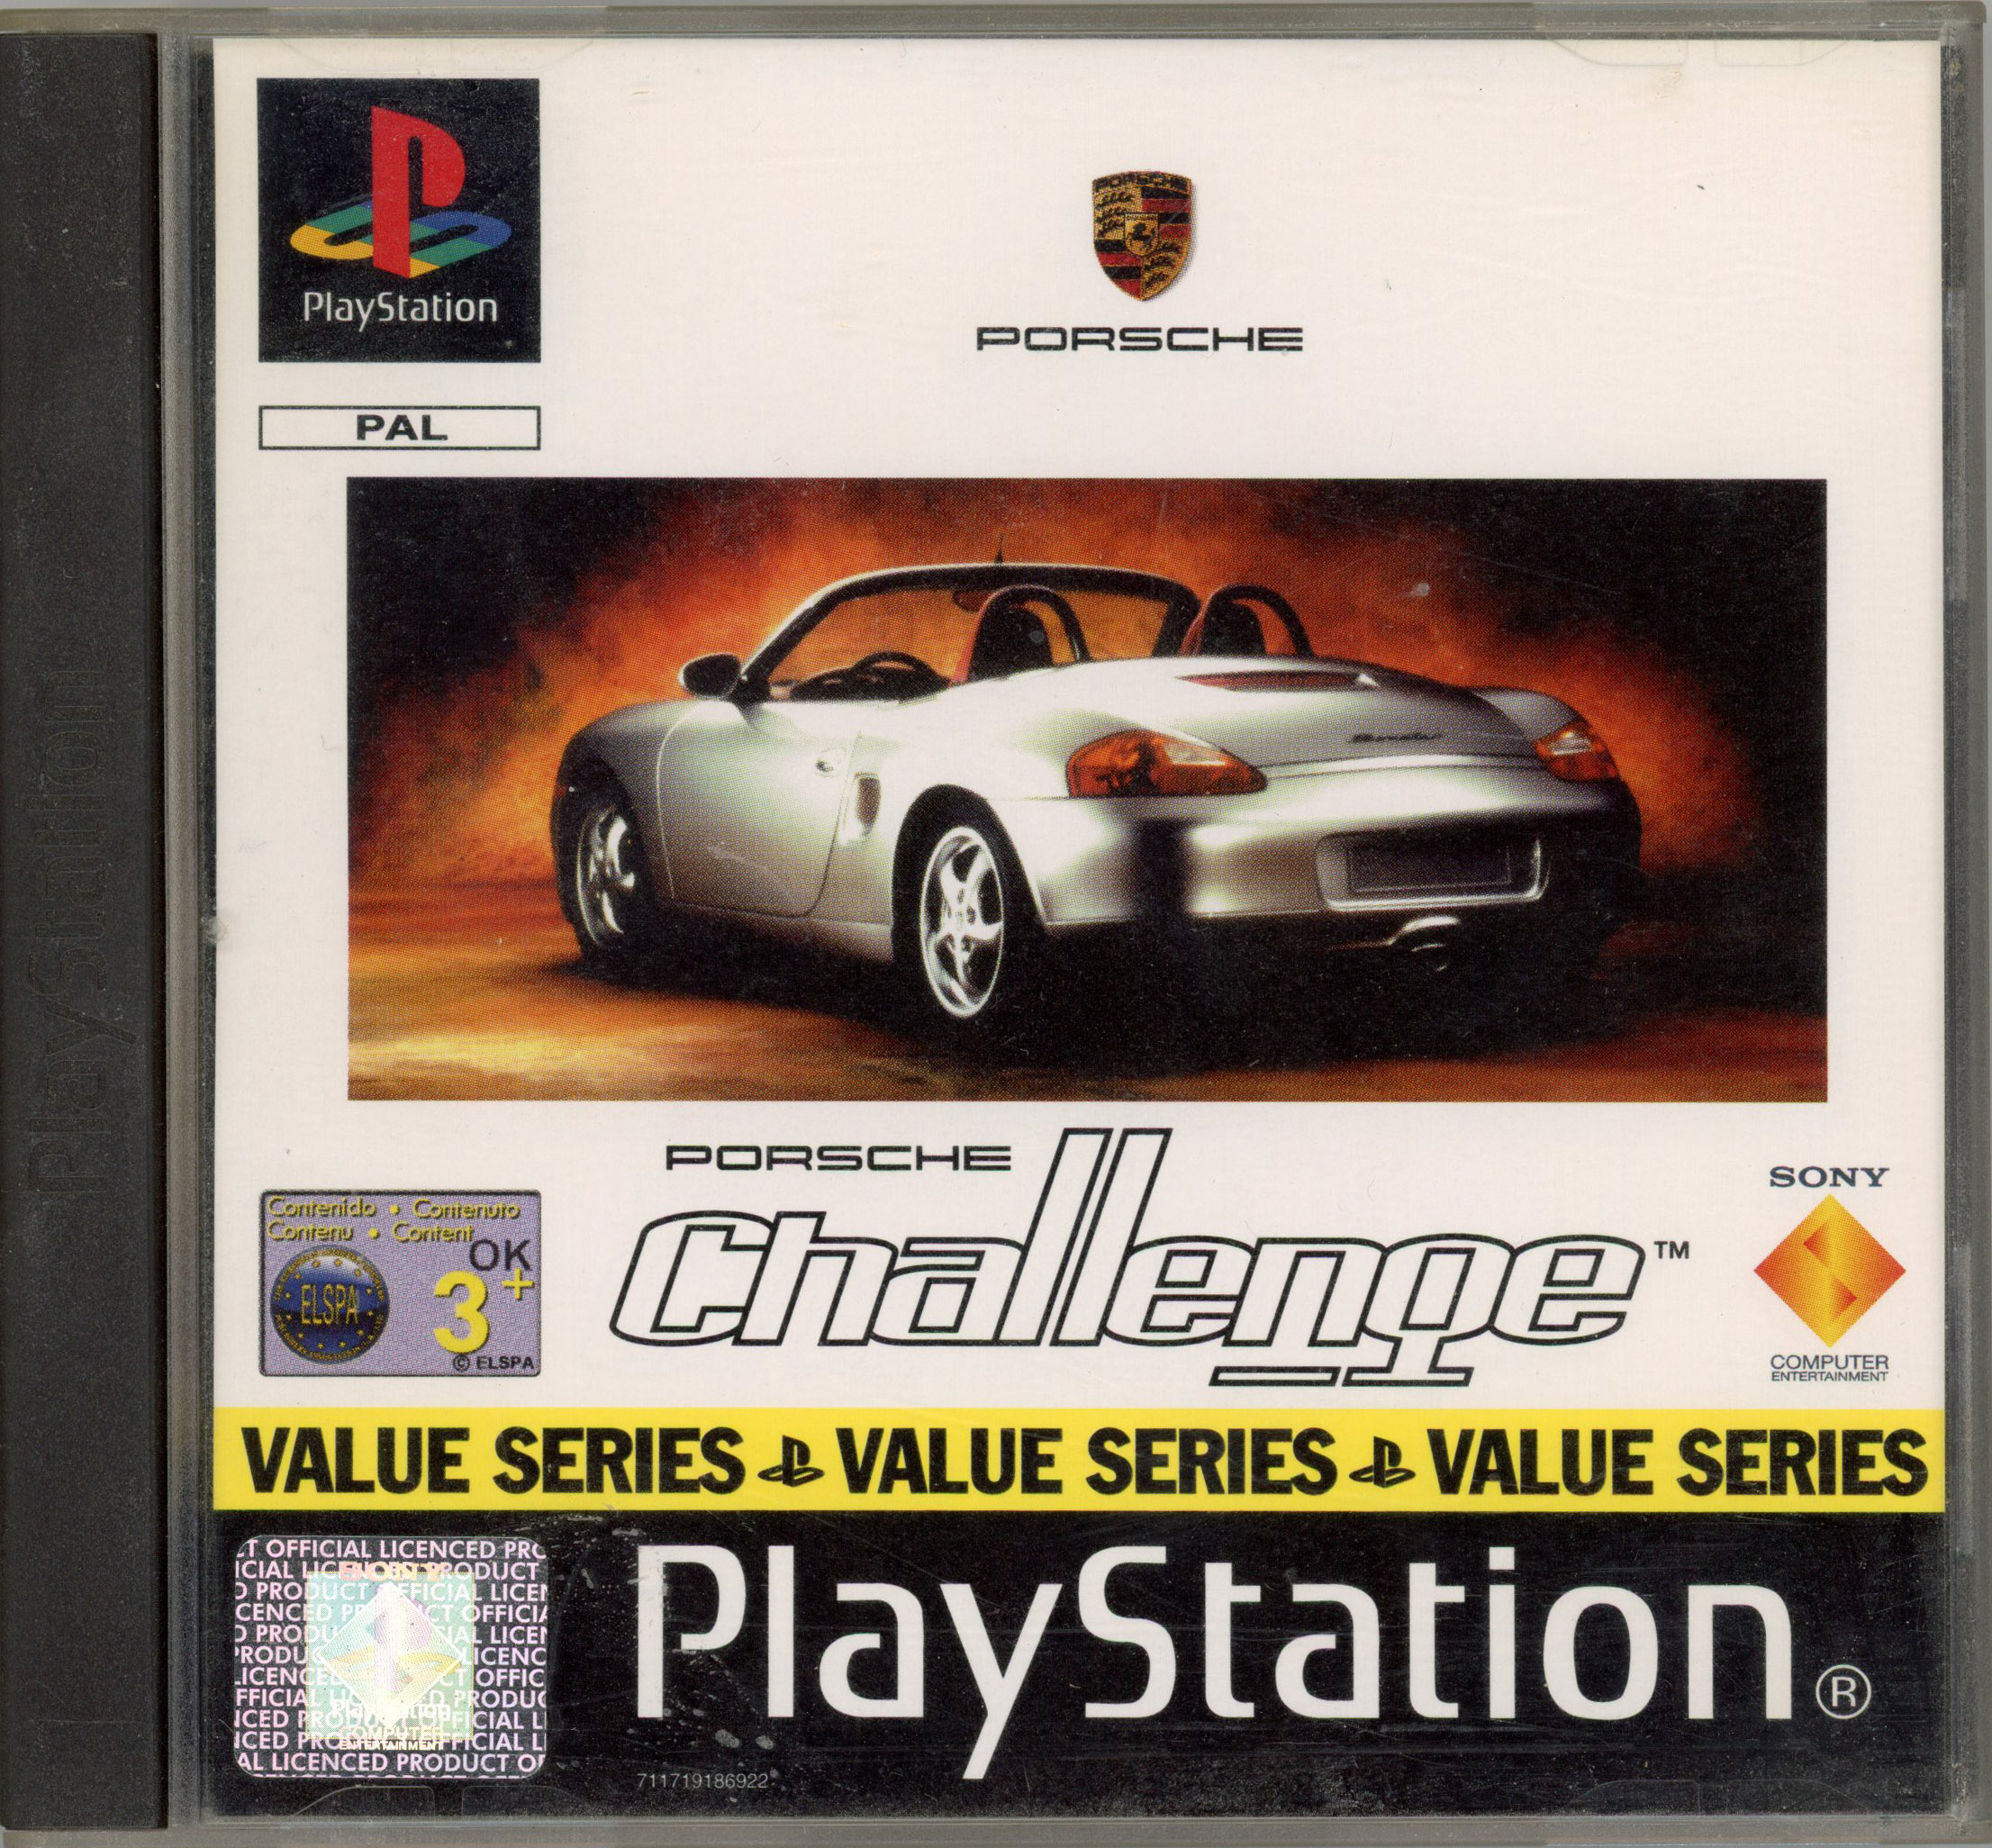 Sony - PlayStation 1 Driving Simulator Collection - Complete in Box - Bild 2 aus 2